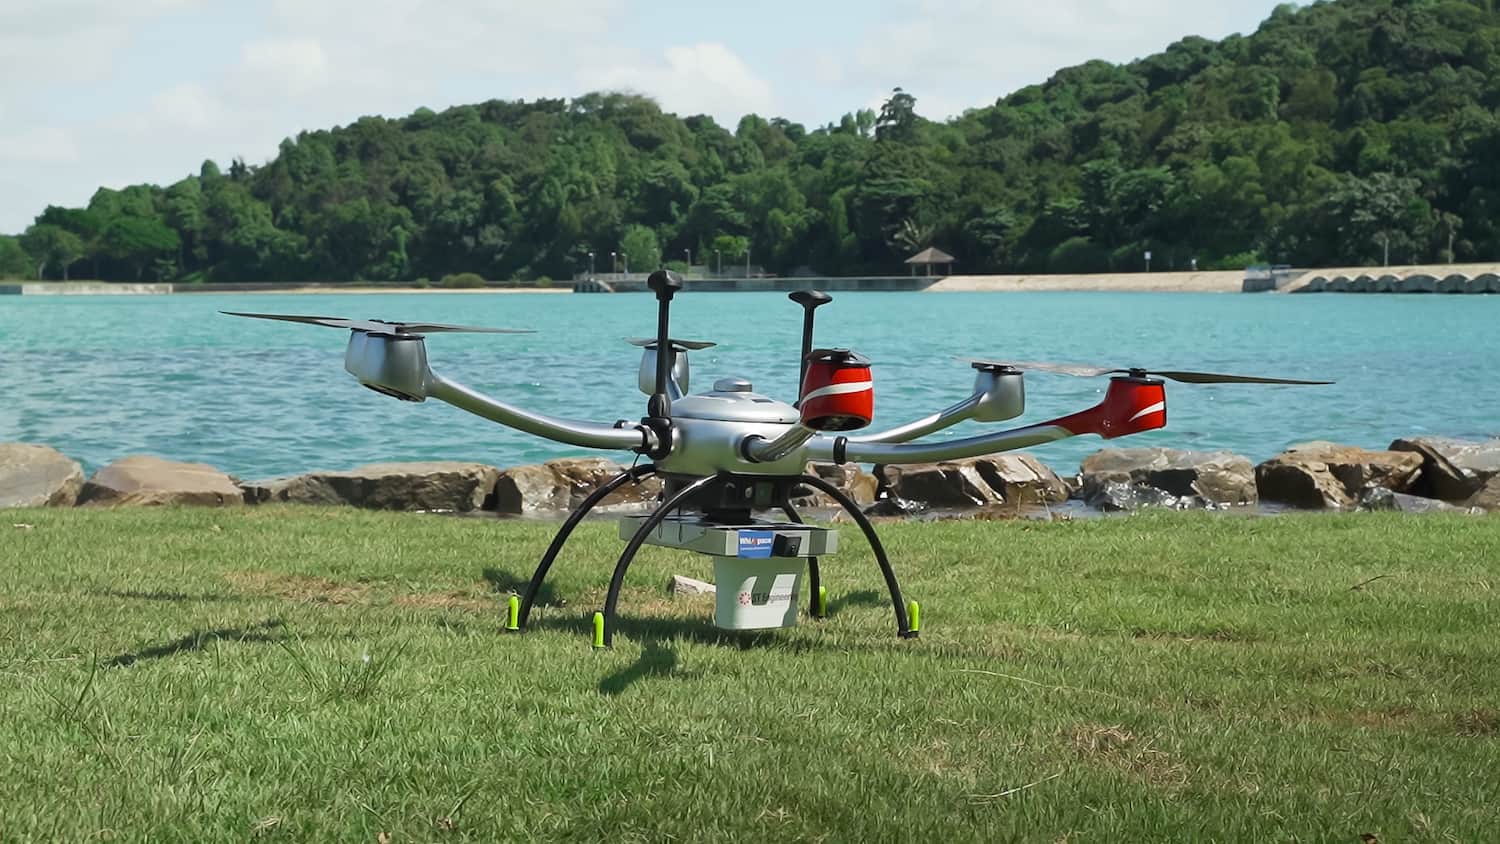 Drones working to keep Singapore safe and support anti-dengue efforts